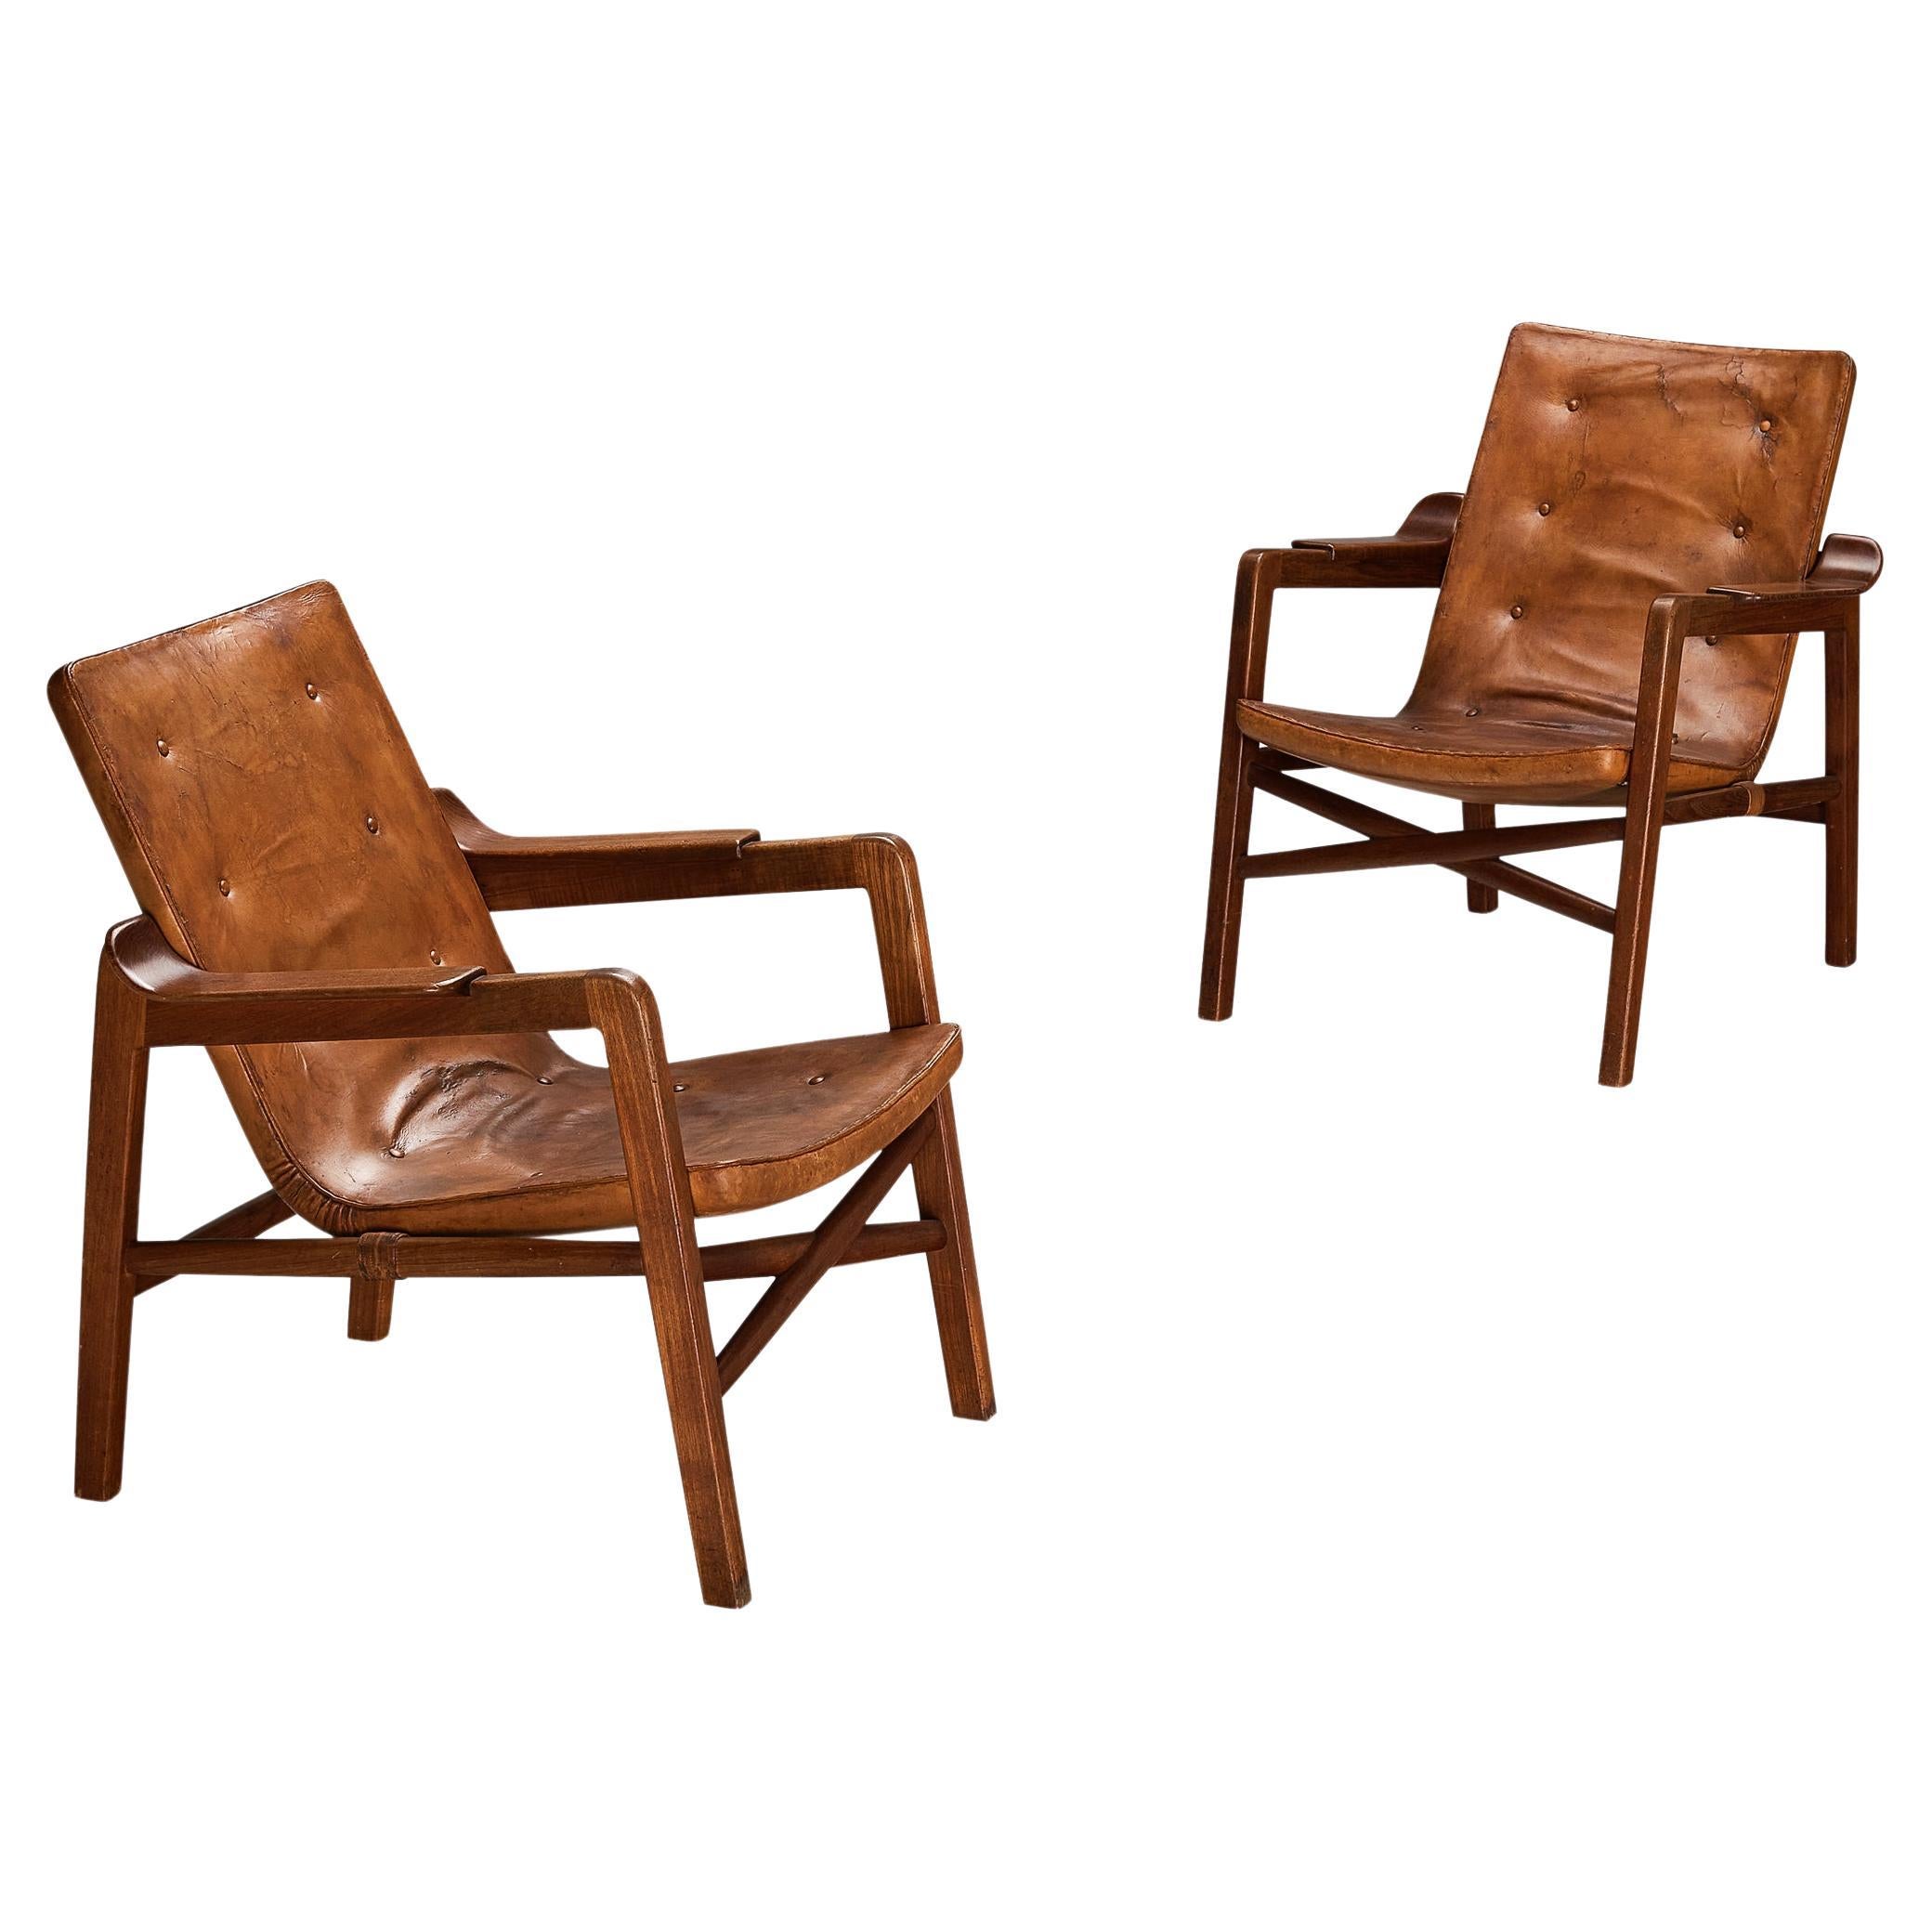 Tove & Edvard Kindt-Larsen Pair of 'Fireside' Armchairs in Original Leather  For Sale